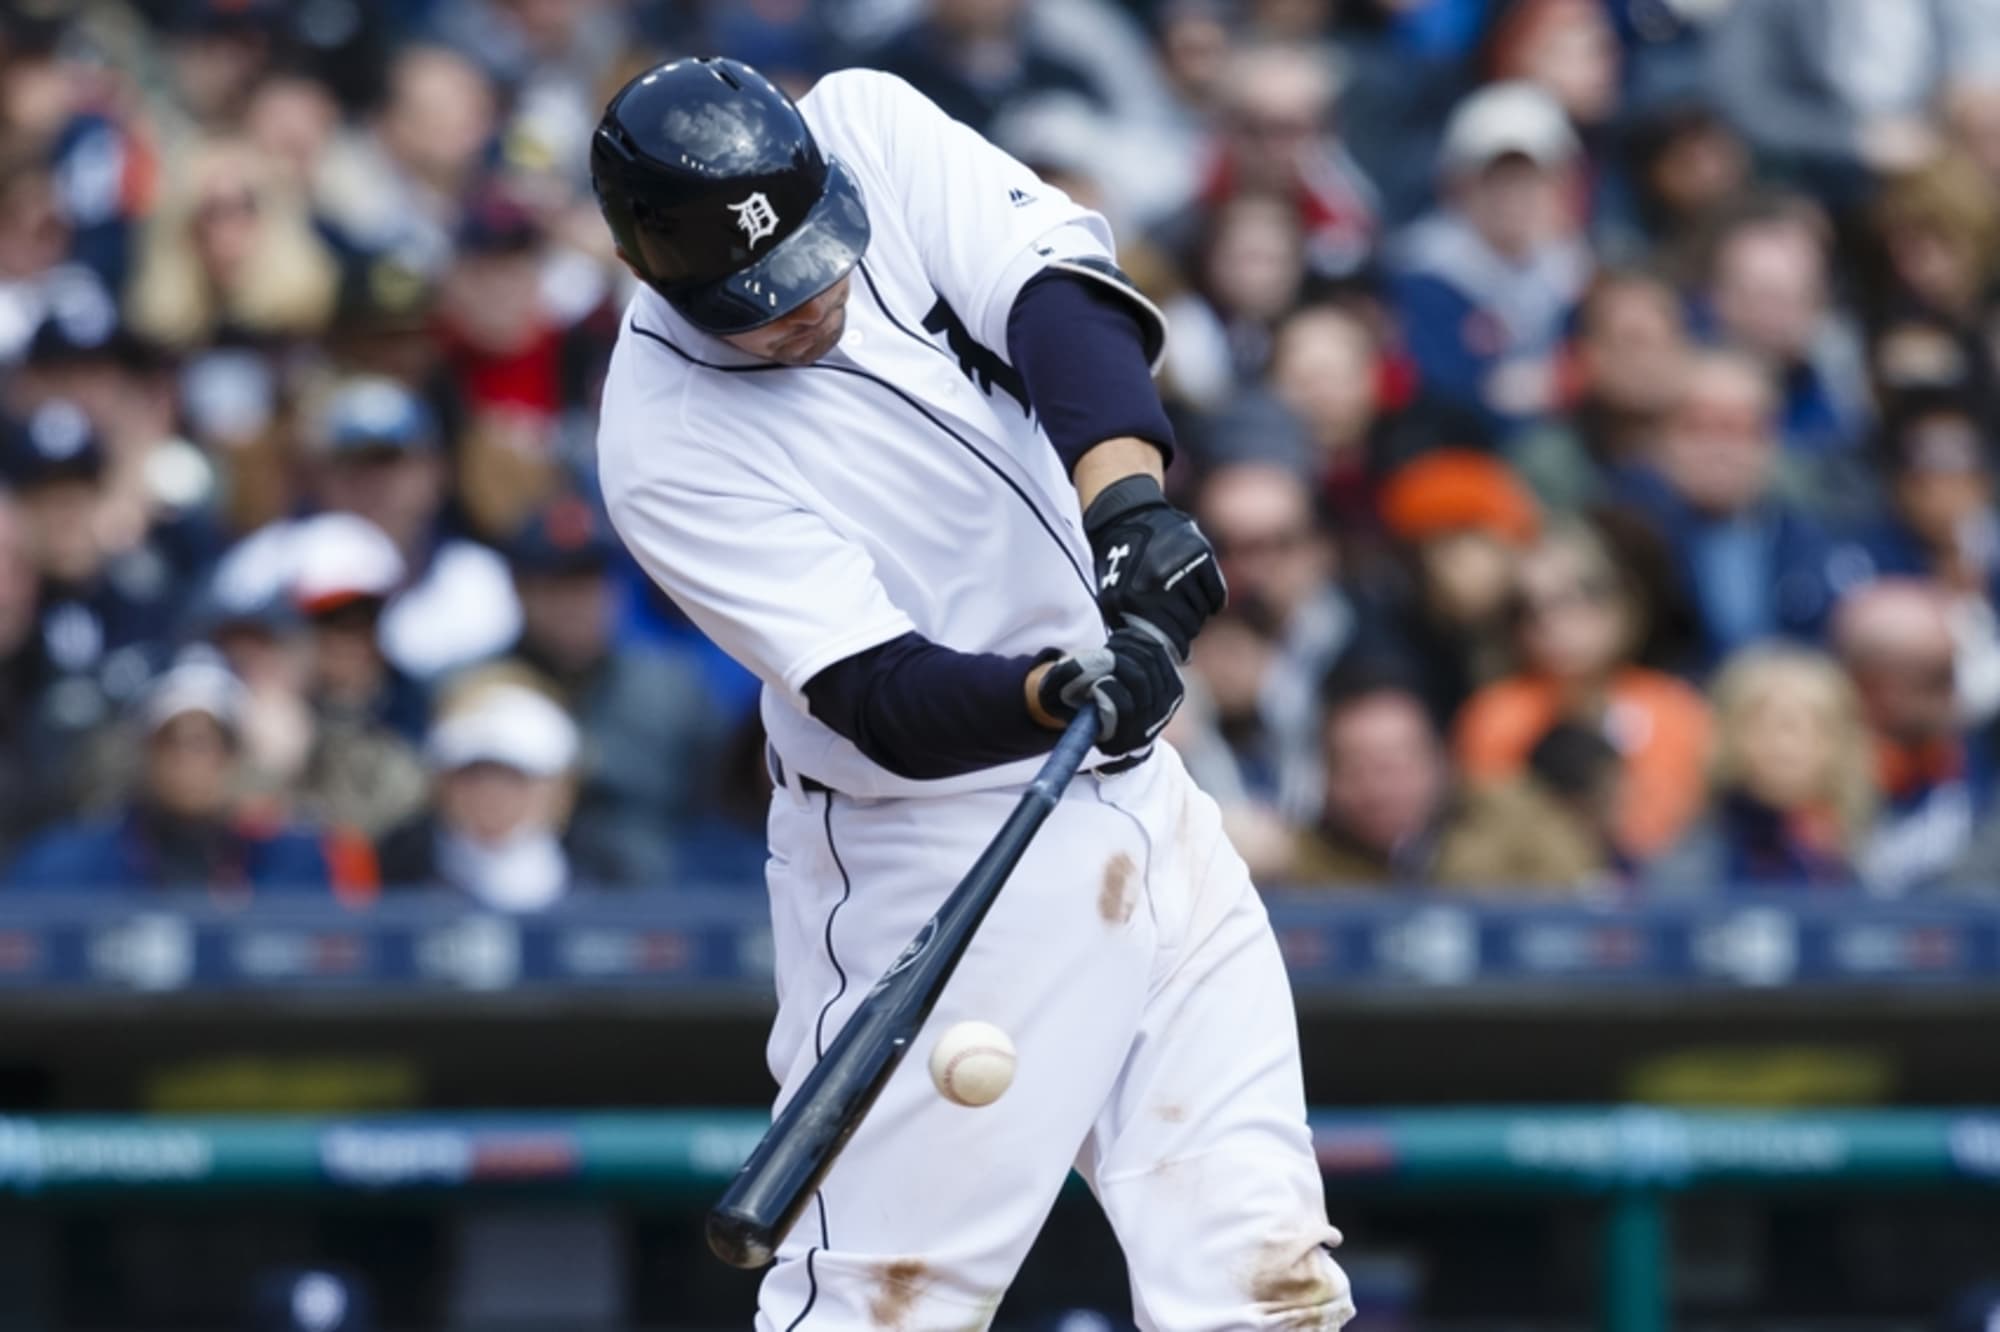 Detroit Tigers: It's Time To Have Faith in Nick Castellanos